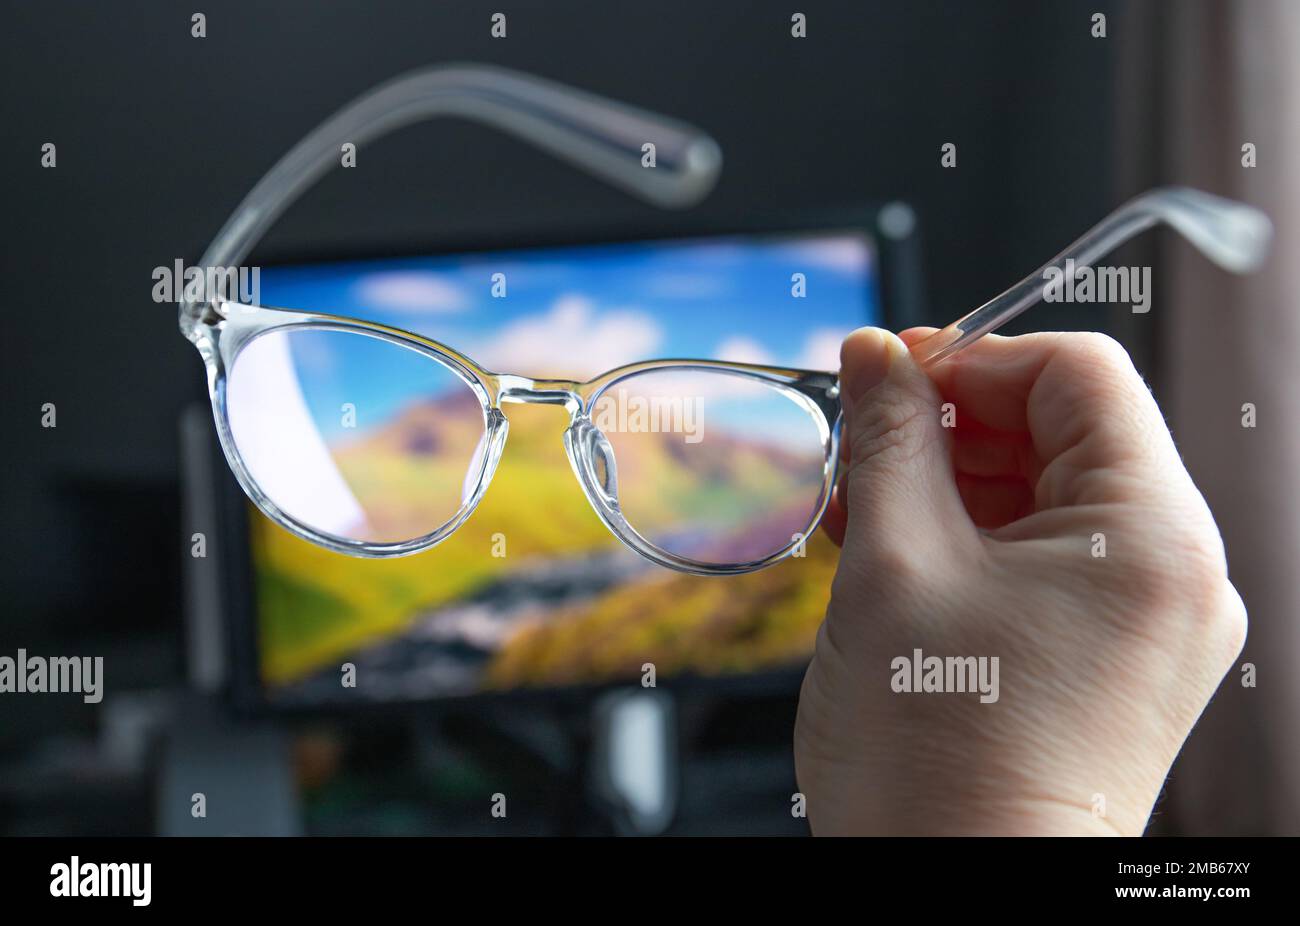 Selective focus on transparent clear blue light computer glasses and computer screen glowing on the background in home or office. Blue light glasses. Stock Photo